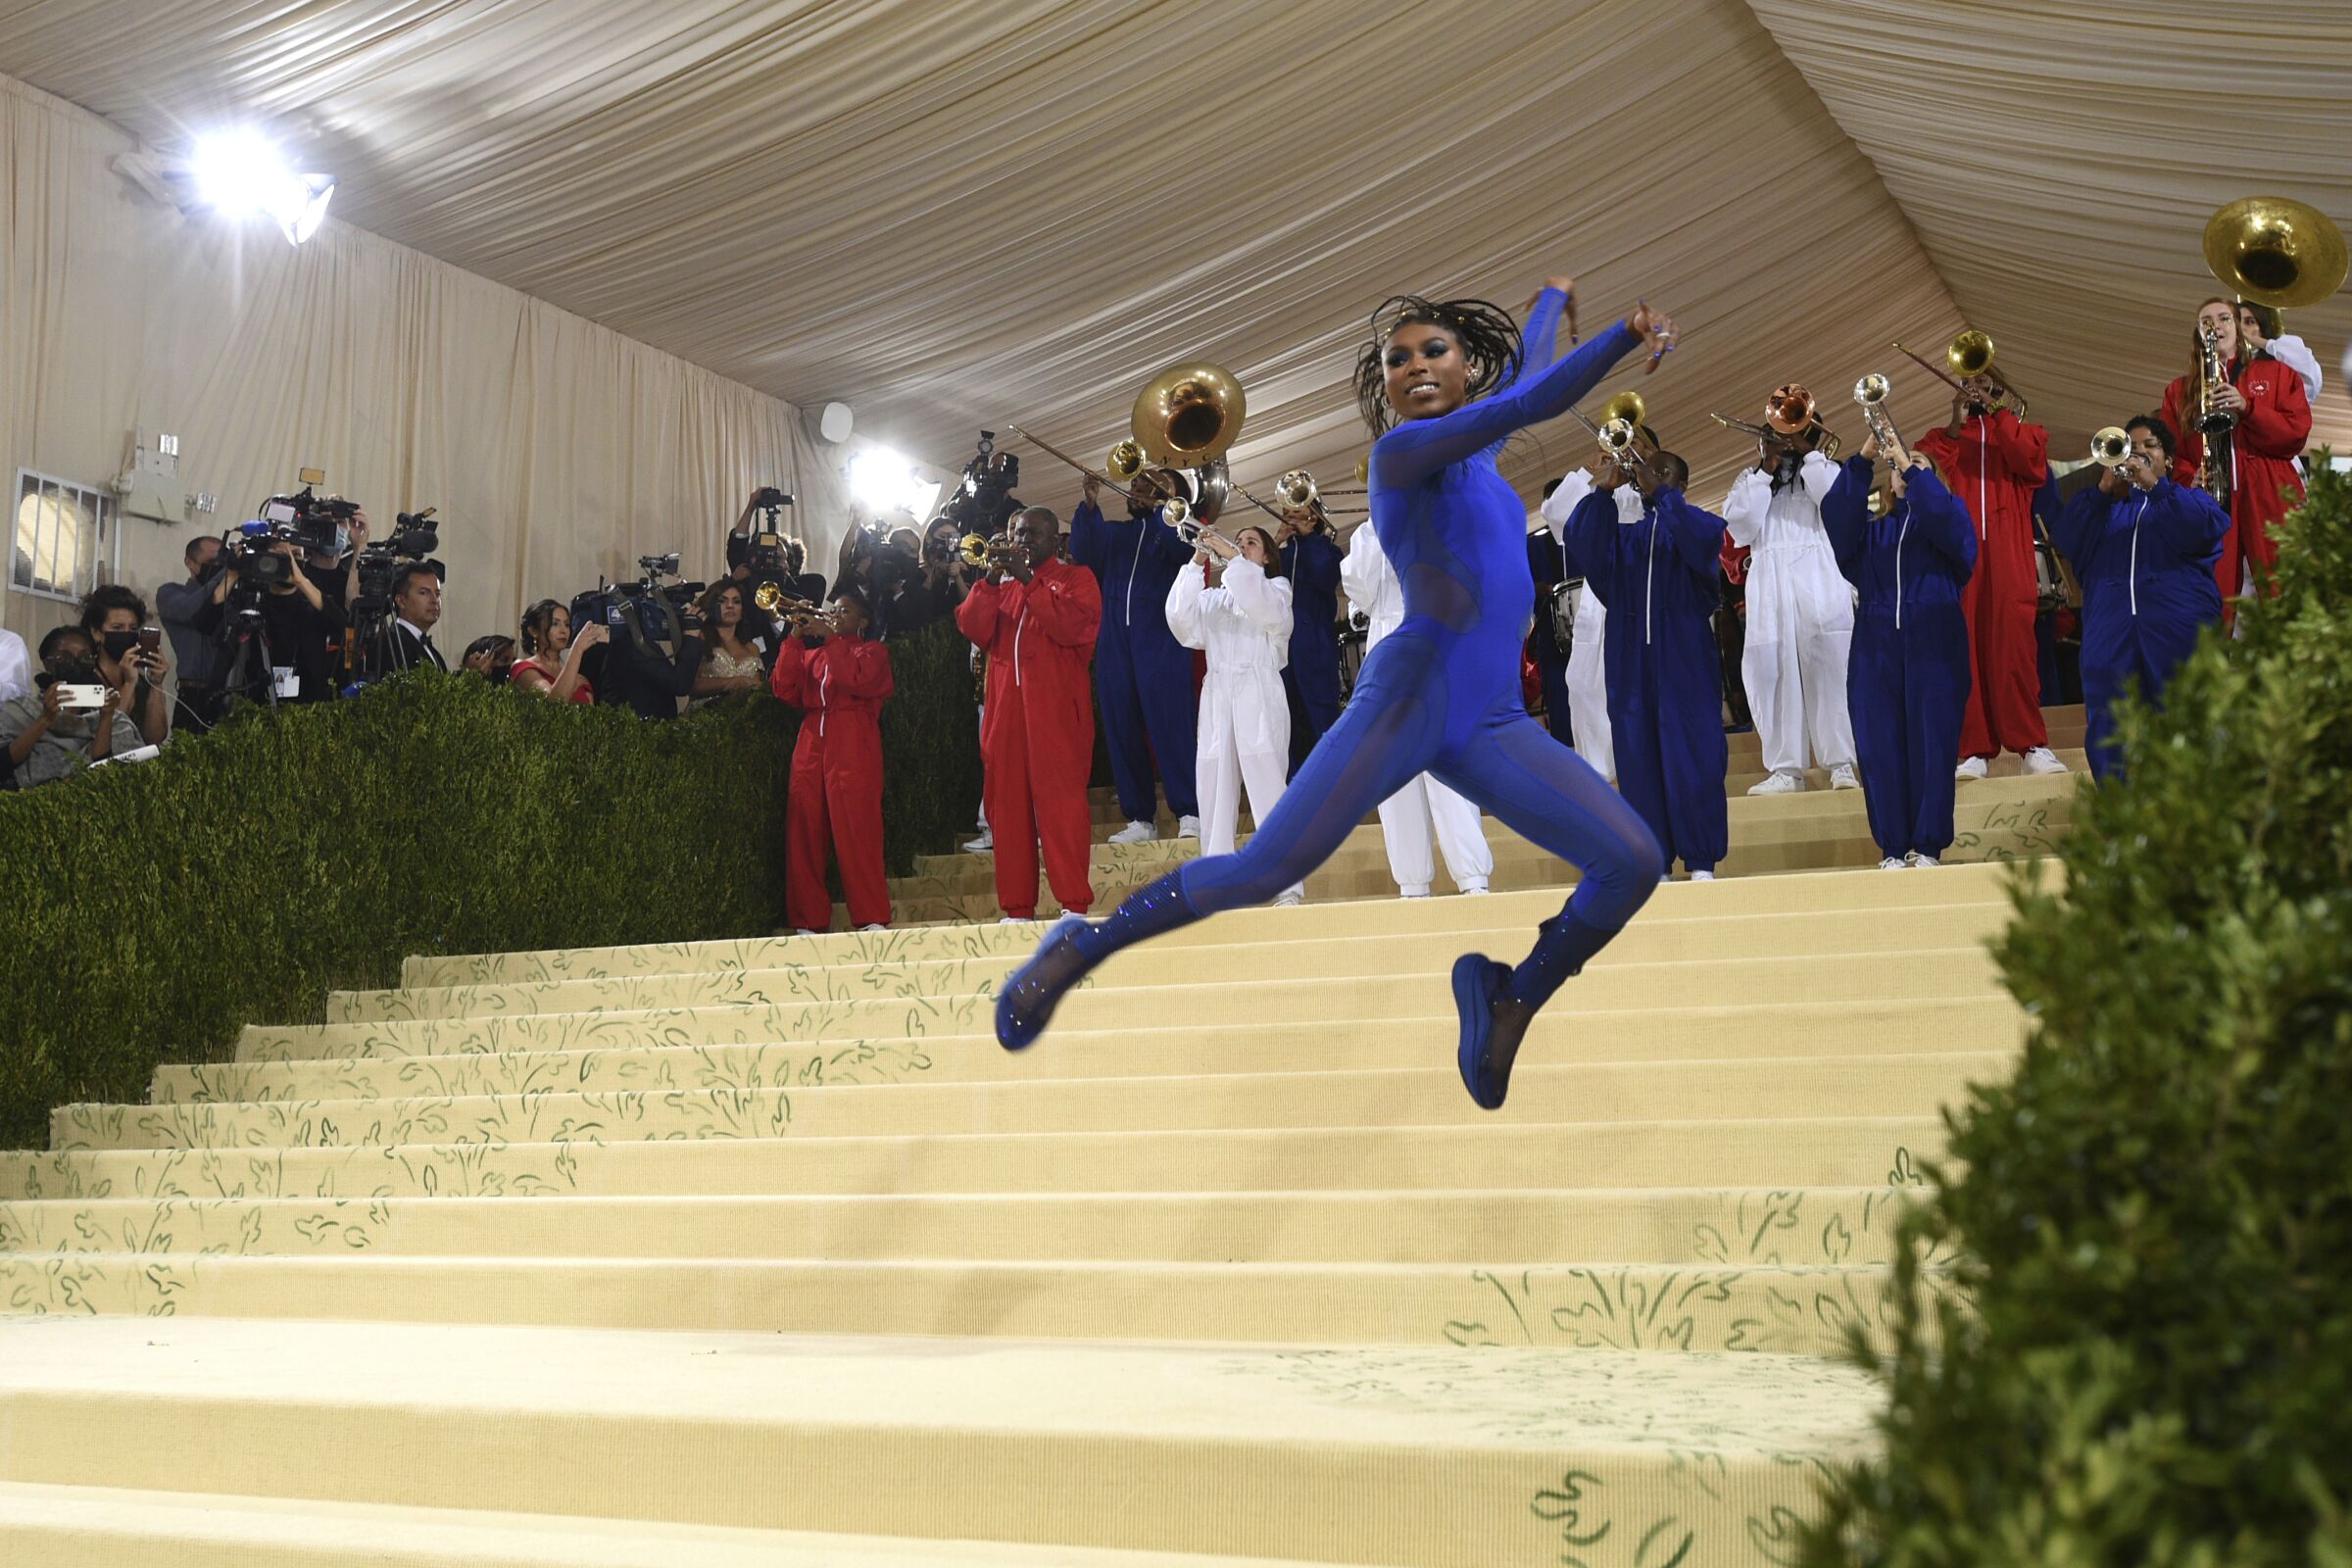 Nia Dennis performs a gymnastics routine, backed by the Brooklyn United marching band, as she arrives at the Met Gala